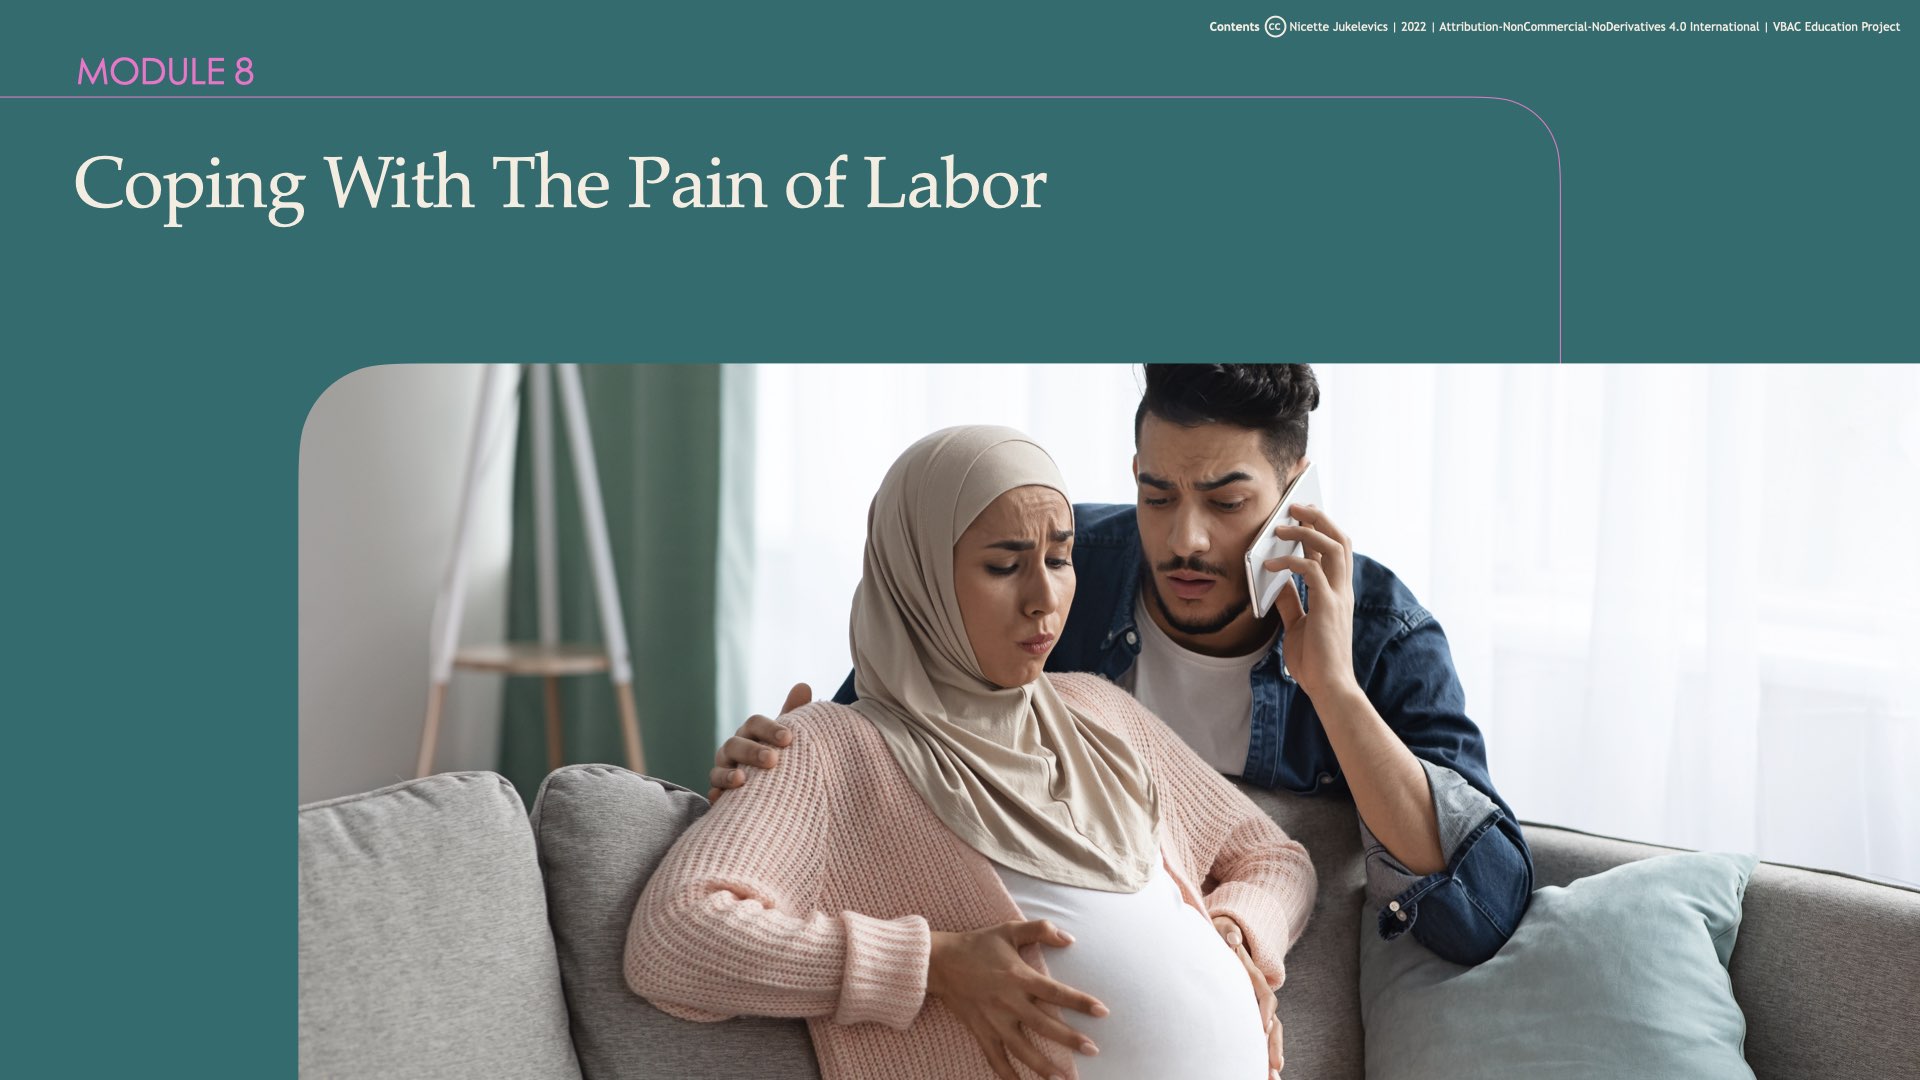 Module 8: Coping With The Pain of Labor